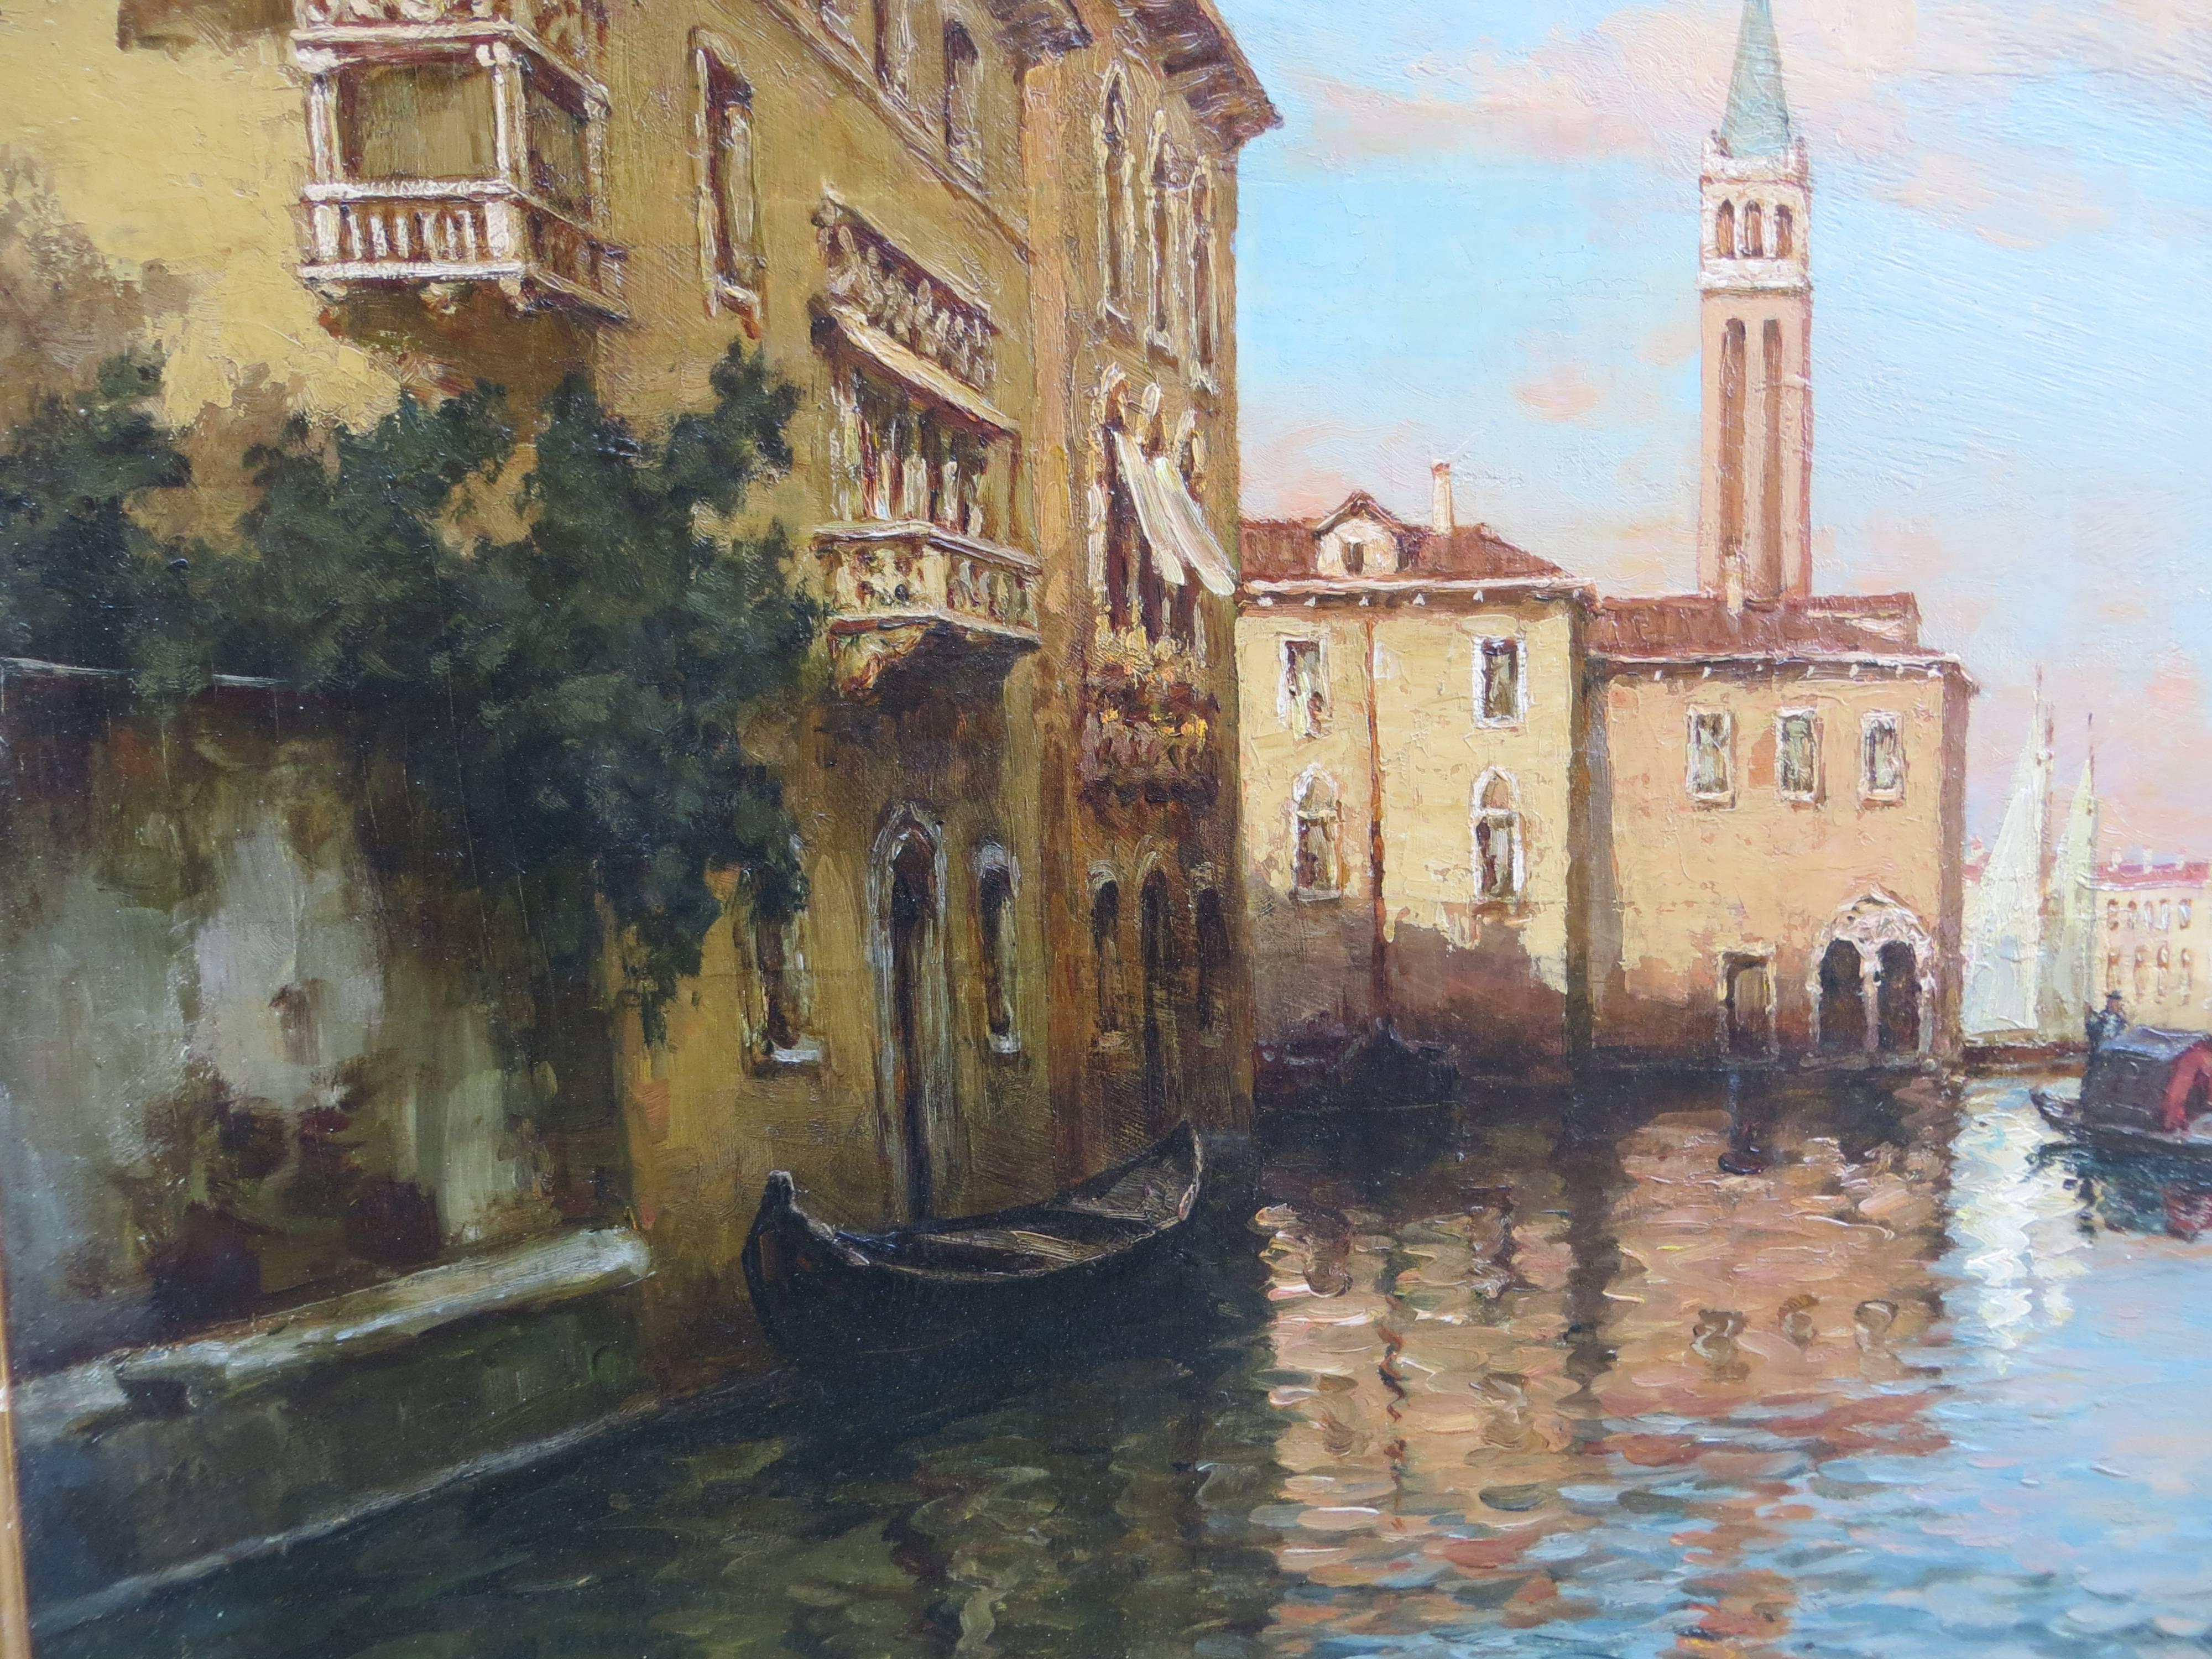 Albert Ferdinand Duprat (1882 -?)

Painter of urban landscapes and water. Post-Impressionist.
He studied the School of Fine Arts in Venice.
He is almost exclusively devoted to painting views of Venice, canals and monuments, some marine lagoon